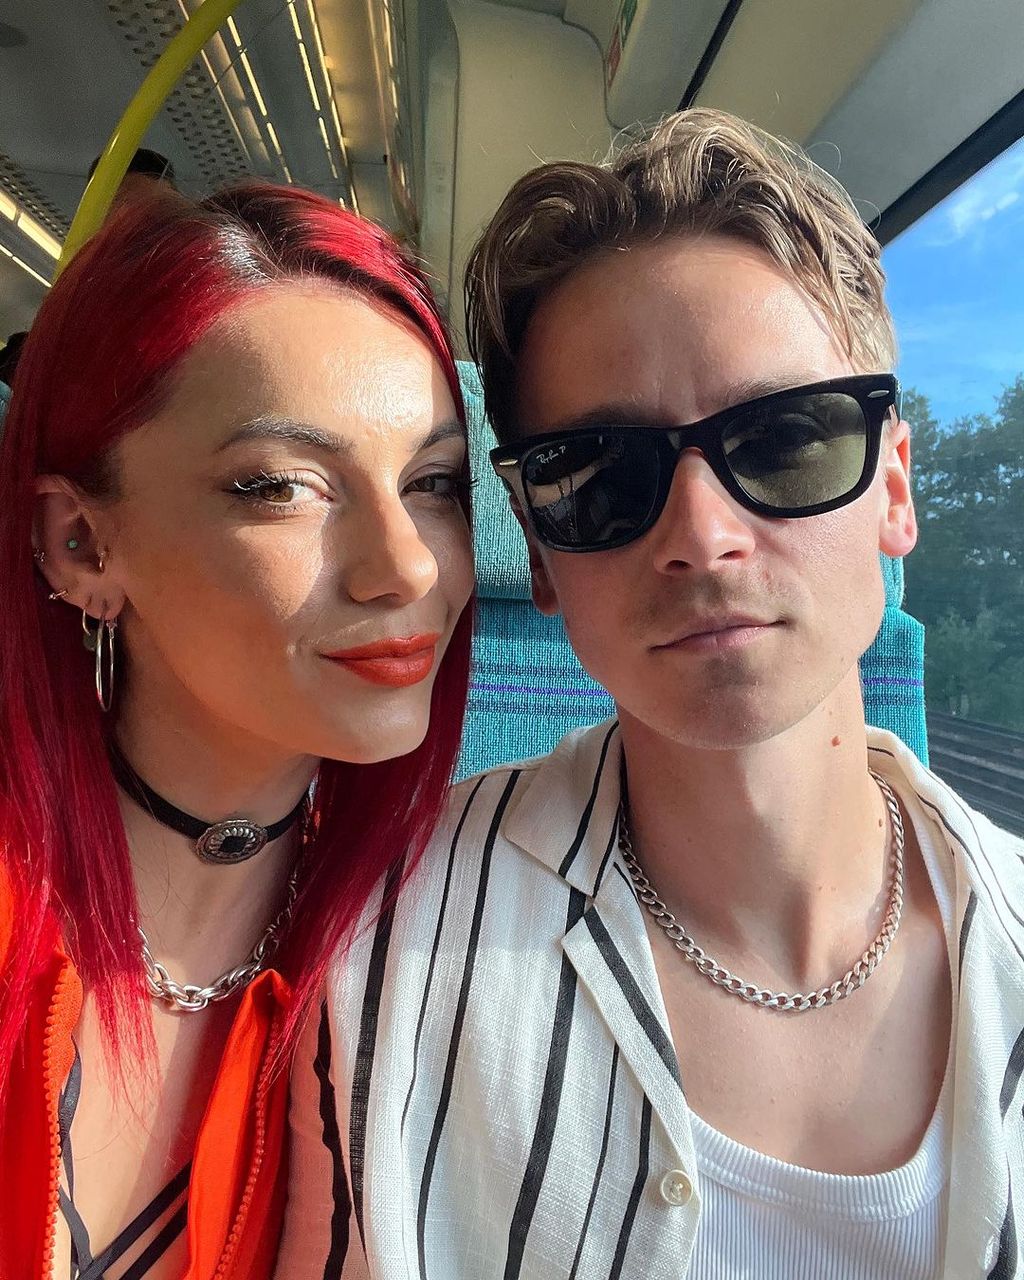 Dianne Buswell and Joe Sugg posing for a selfie in a train